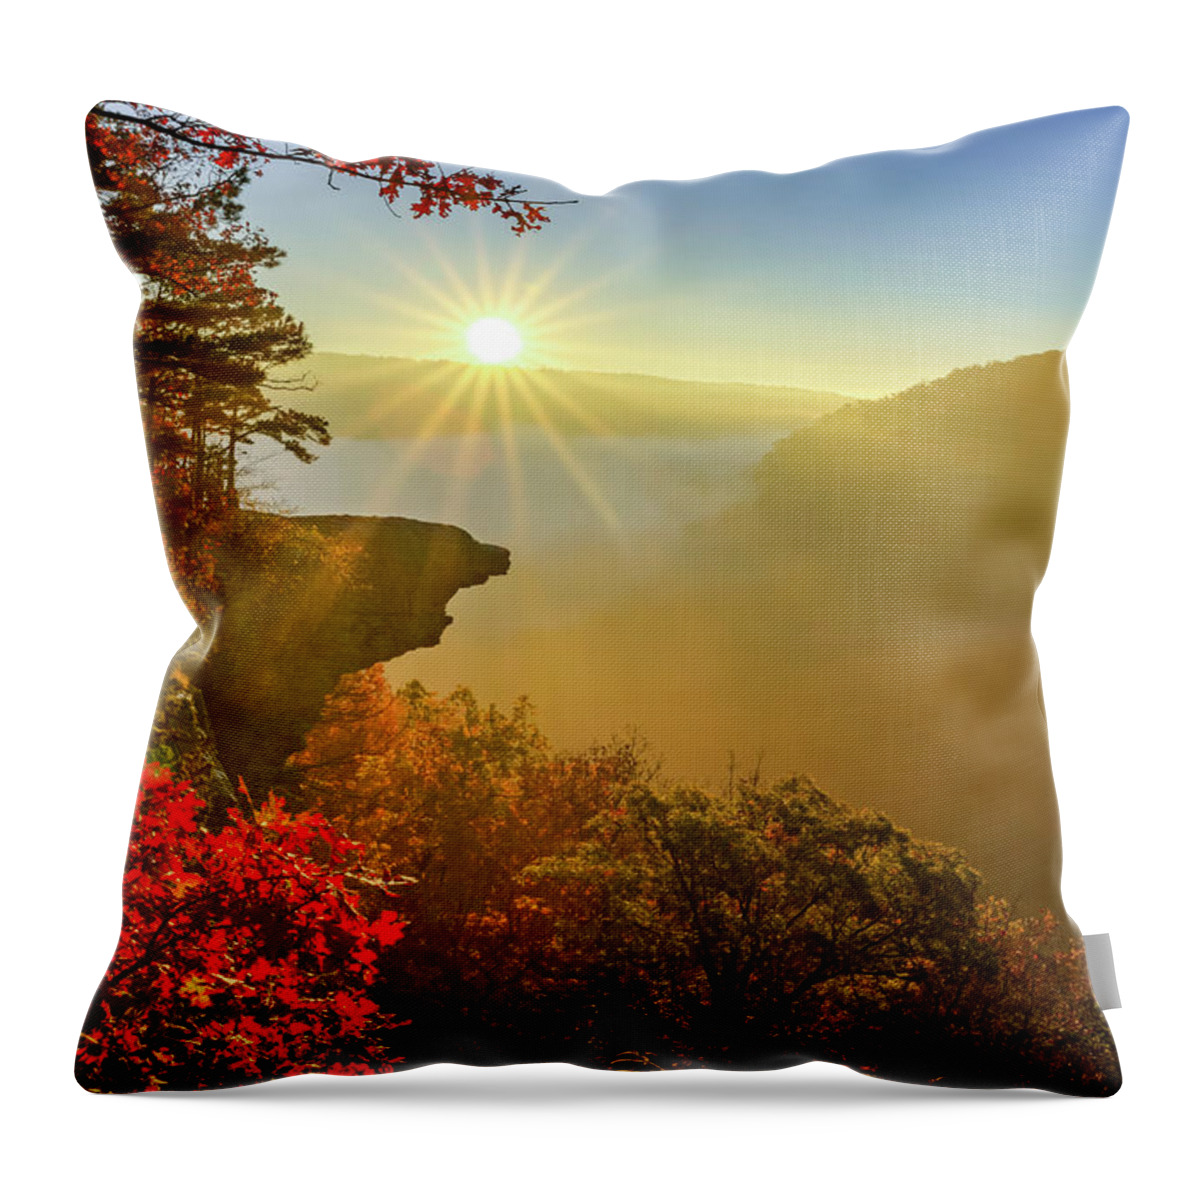 Ozark Forest Throw Pillow featuring the photograph Autumn Morning Glory At Hawksbill Crag - Ozark National Forest by Gregory Ballos